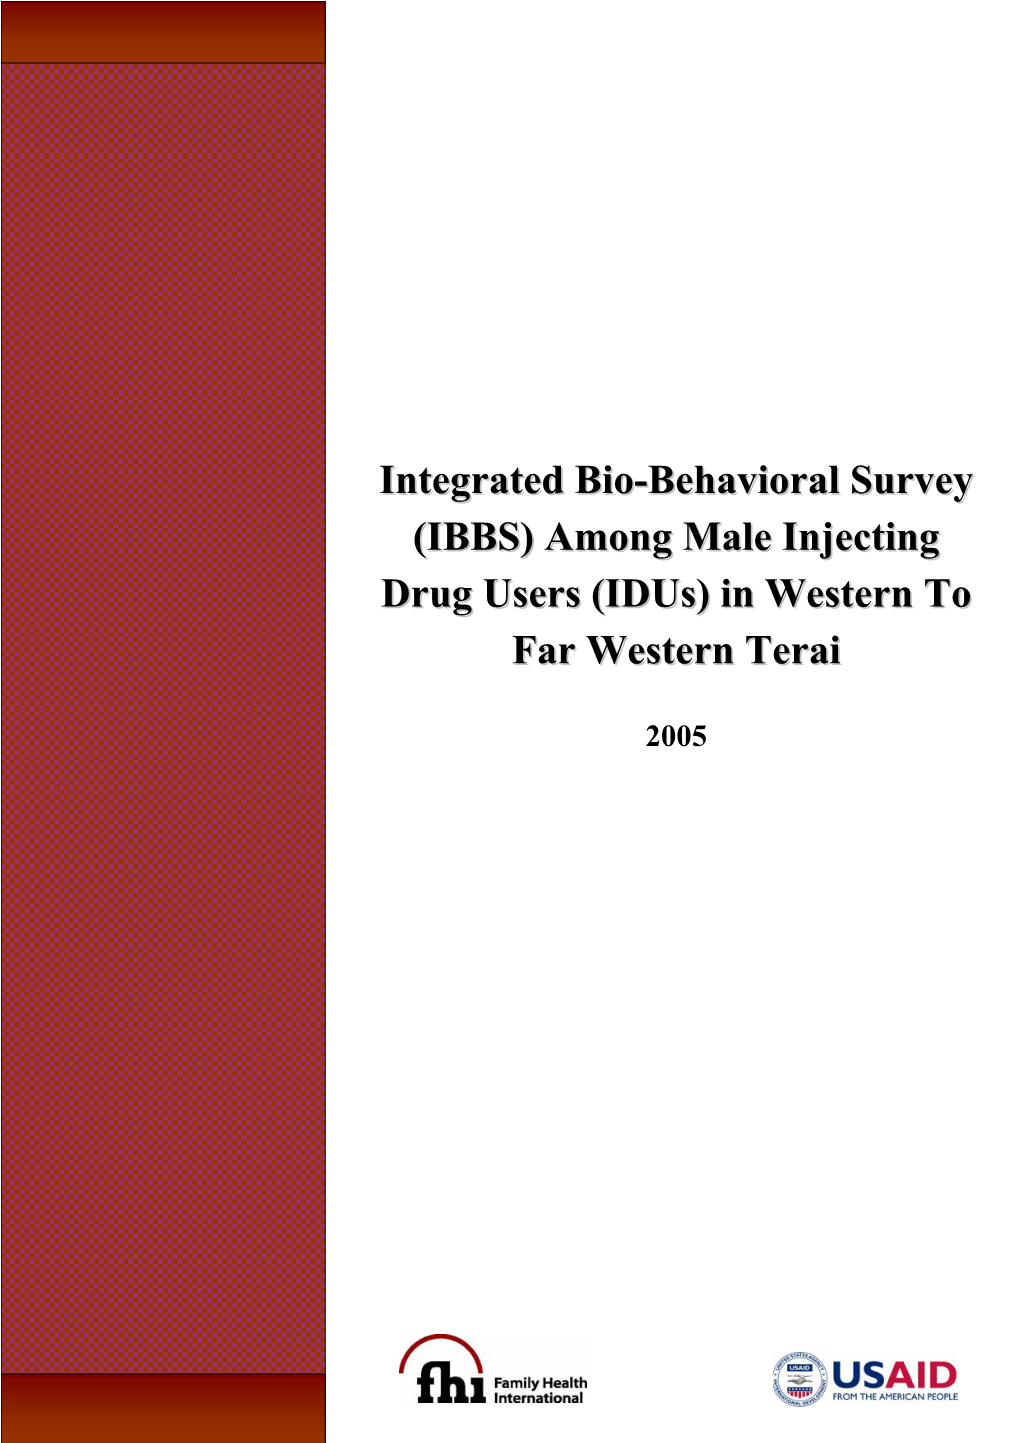 Integrated Bio-Behavioral Survey Among Male Injecting Drug Users In